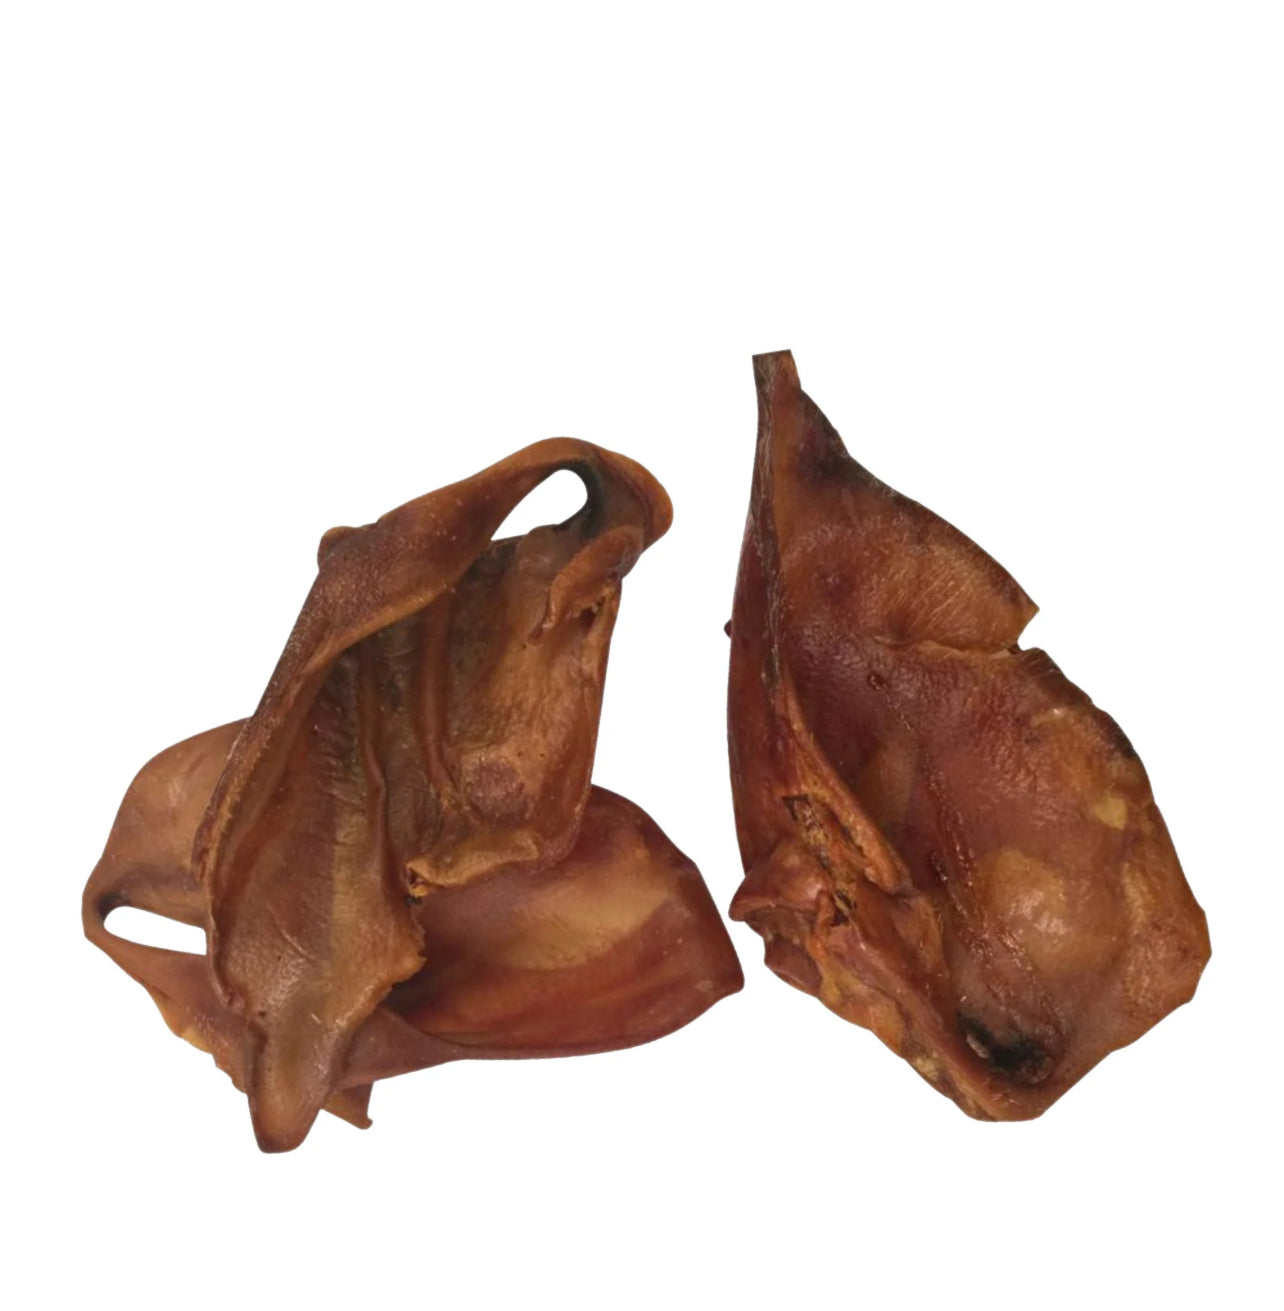 Sow Ears "Extra Large Pig Ears”